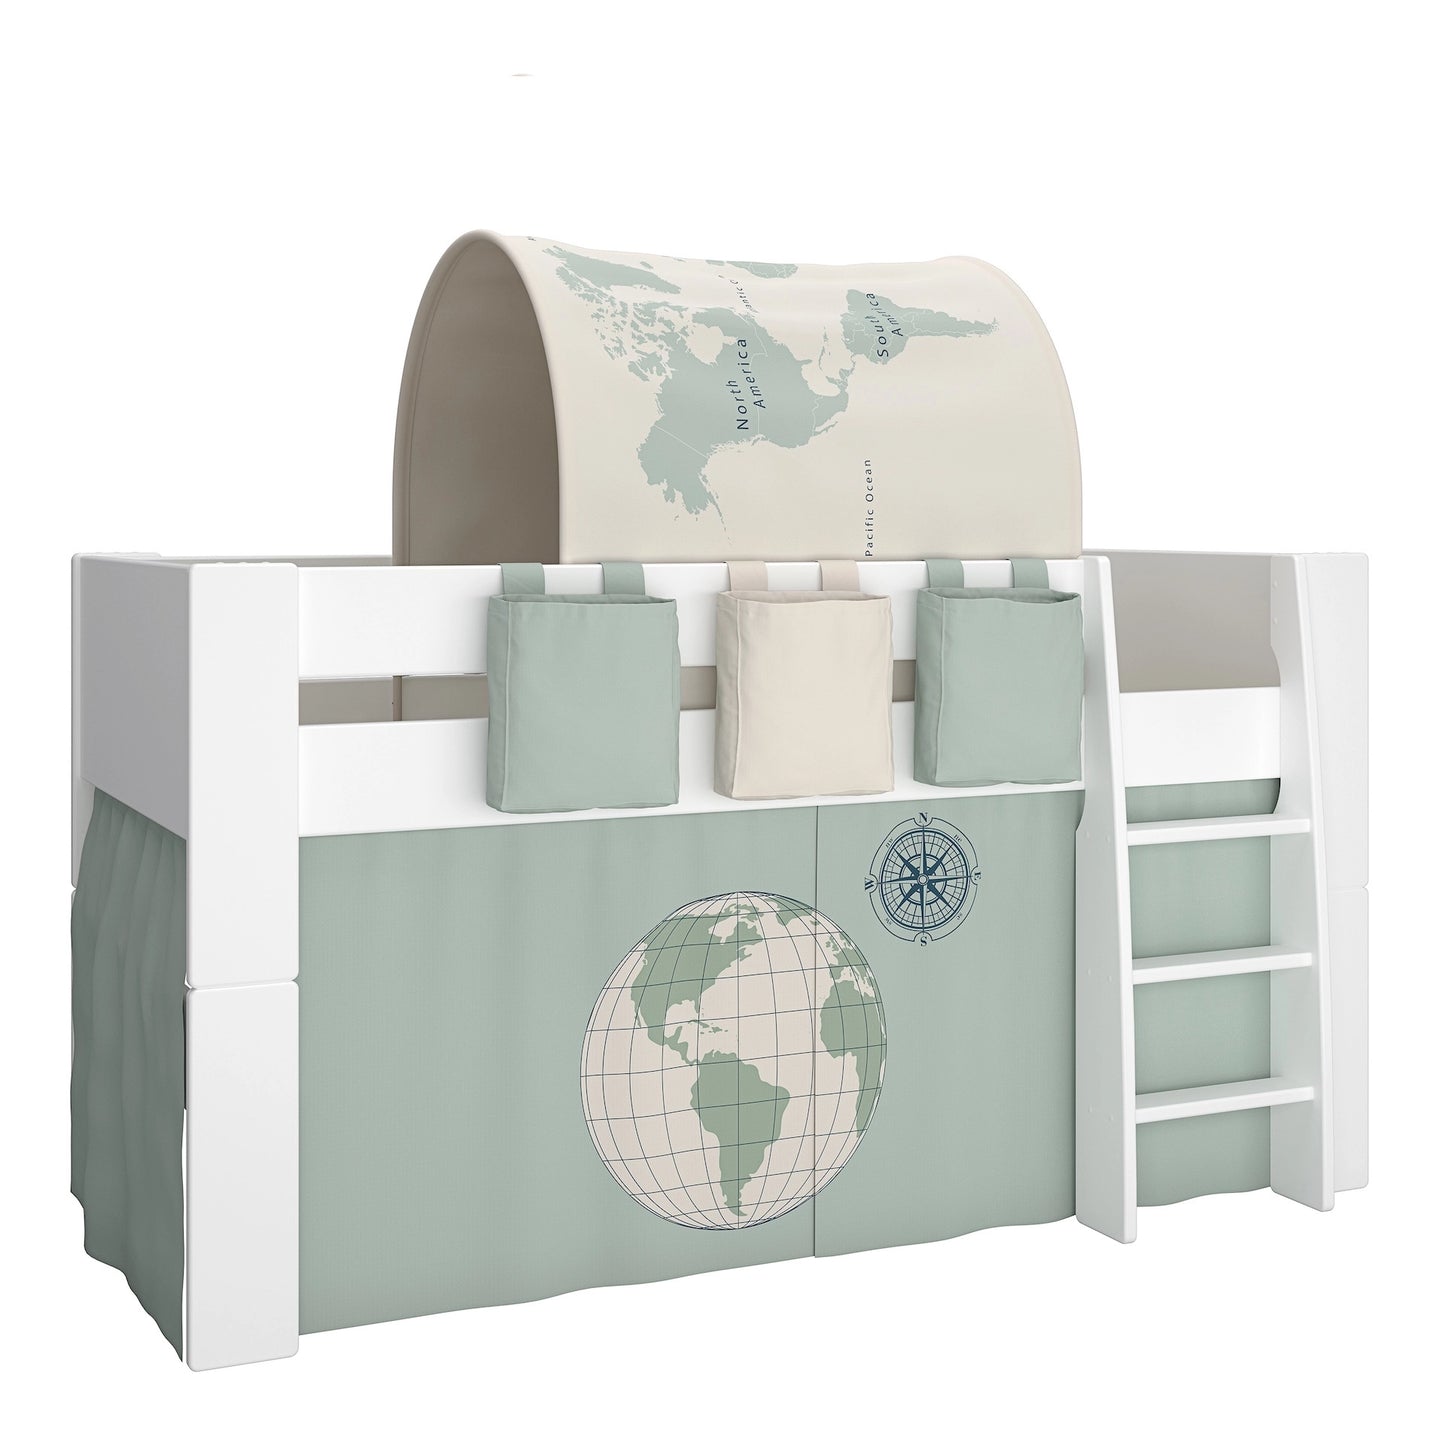 Furniture To Go Steens For Kids Mid Sleeper in Whitewash Grey Brown Lacquered, Includes - World Tent + Tunnel + 2 Pockets in Green + 1 Pocket in Sand